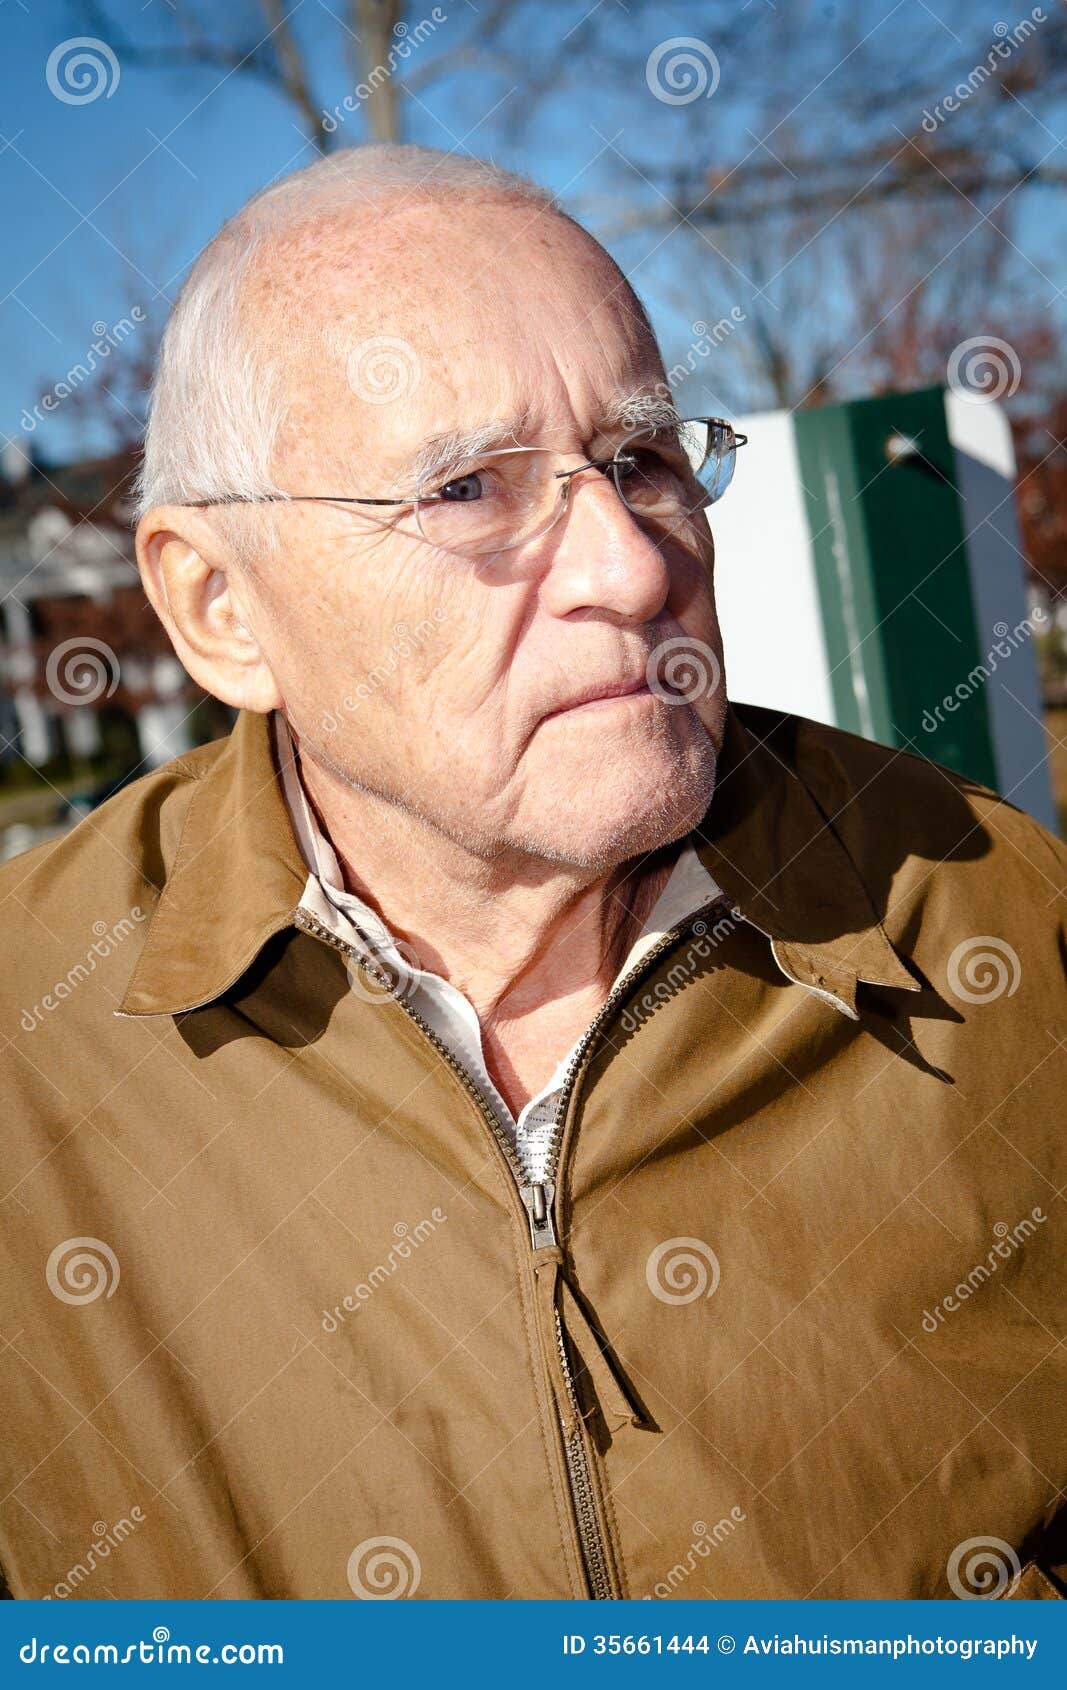 Concerned Old Man Stock Photo. Image Of Experience, Casual - 35661444